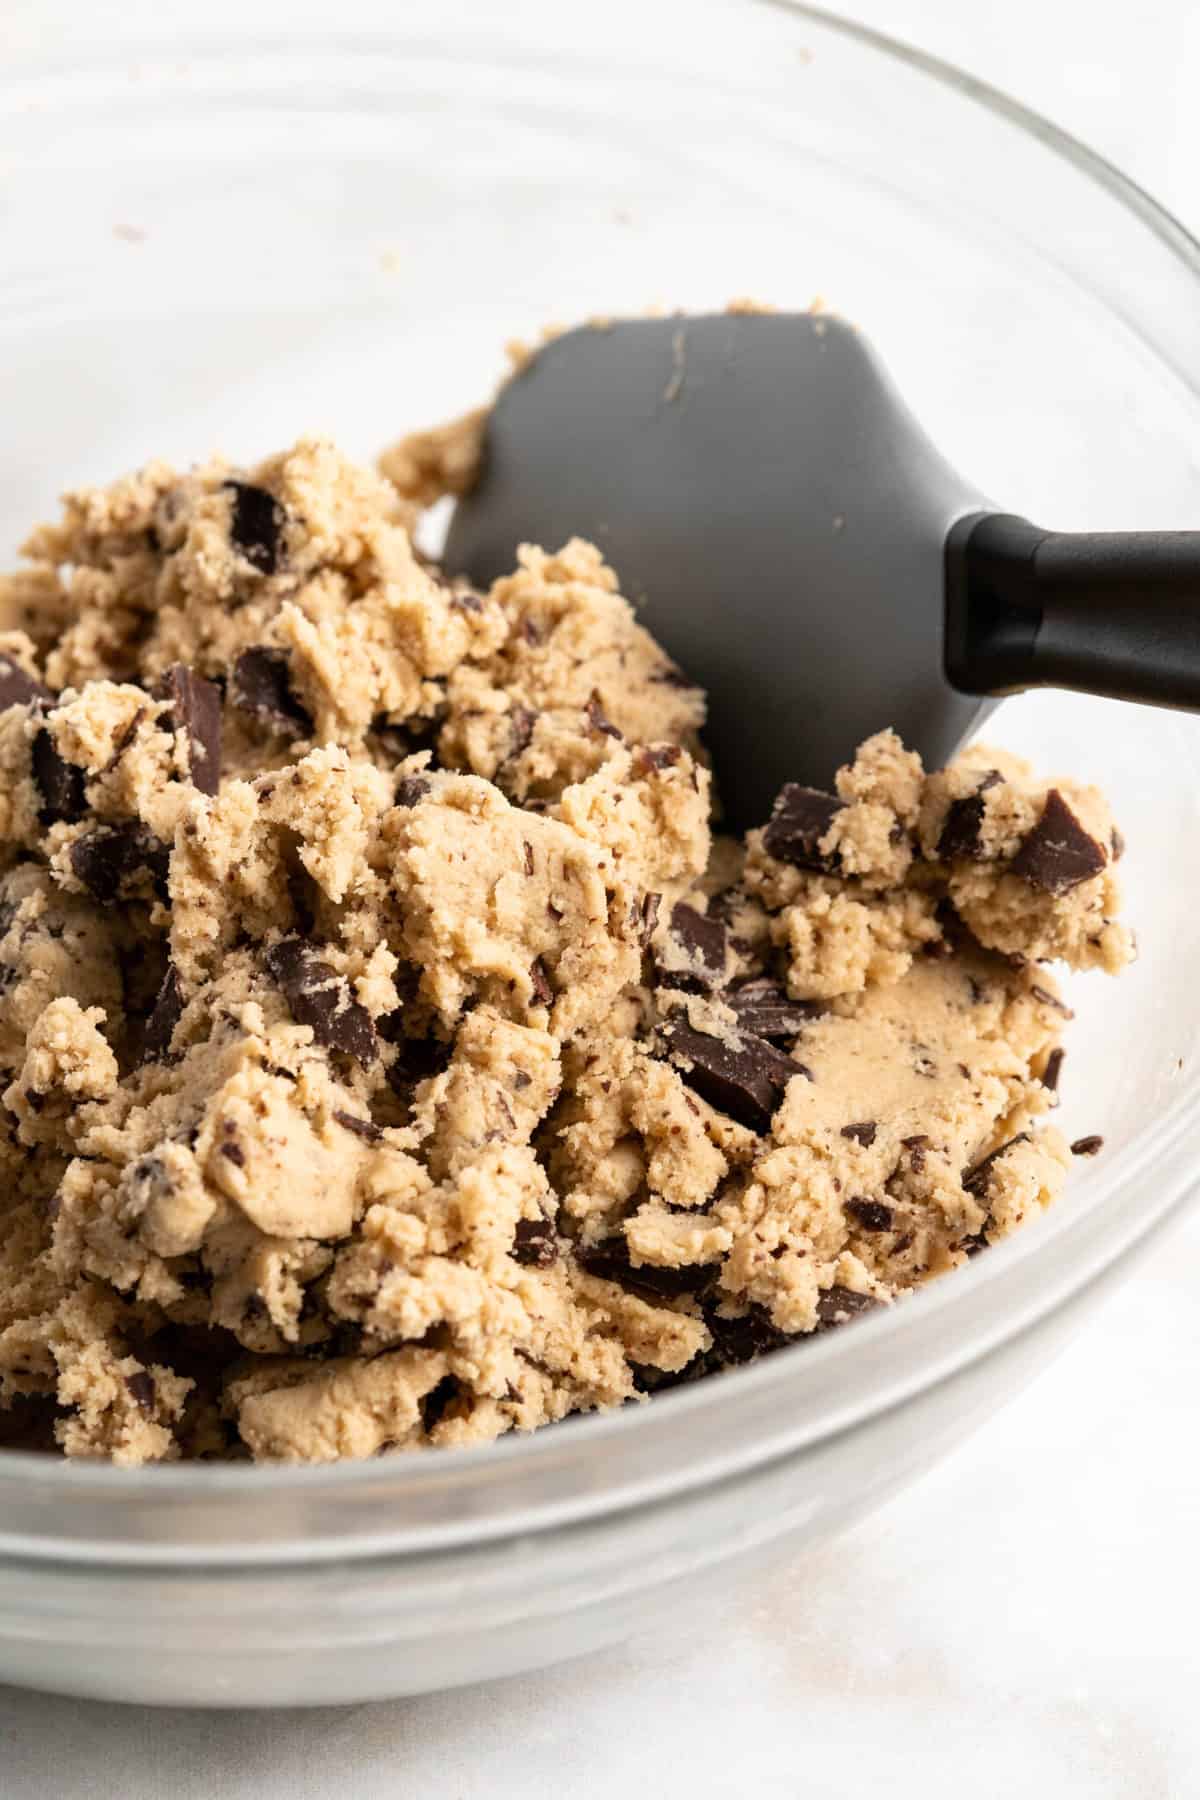 Chocolate chip cookie dough in glass bowl with rubber spatula